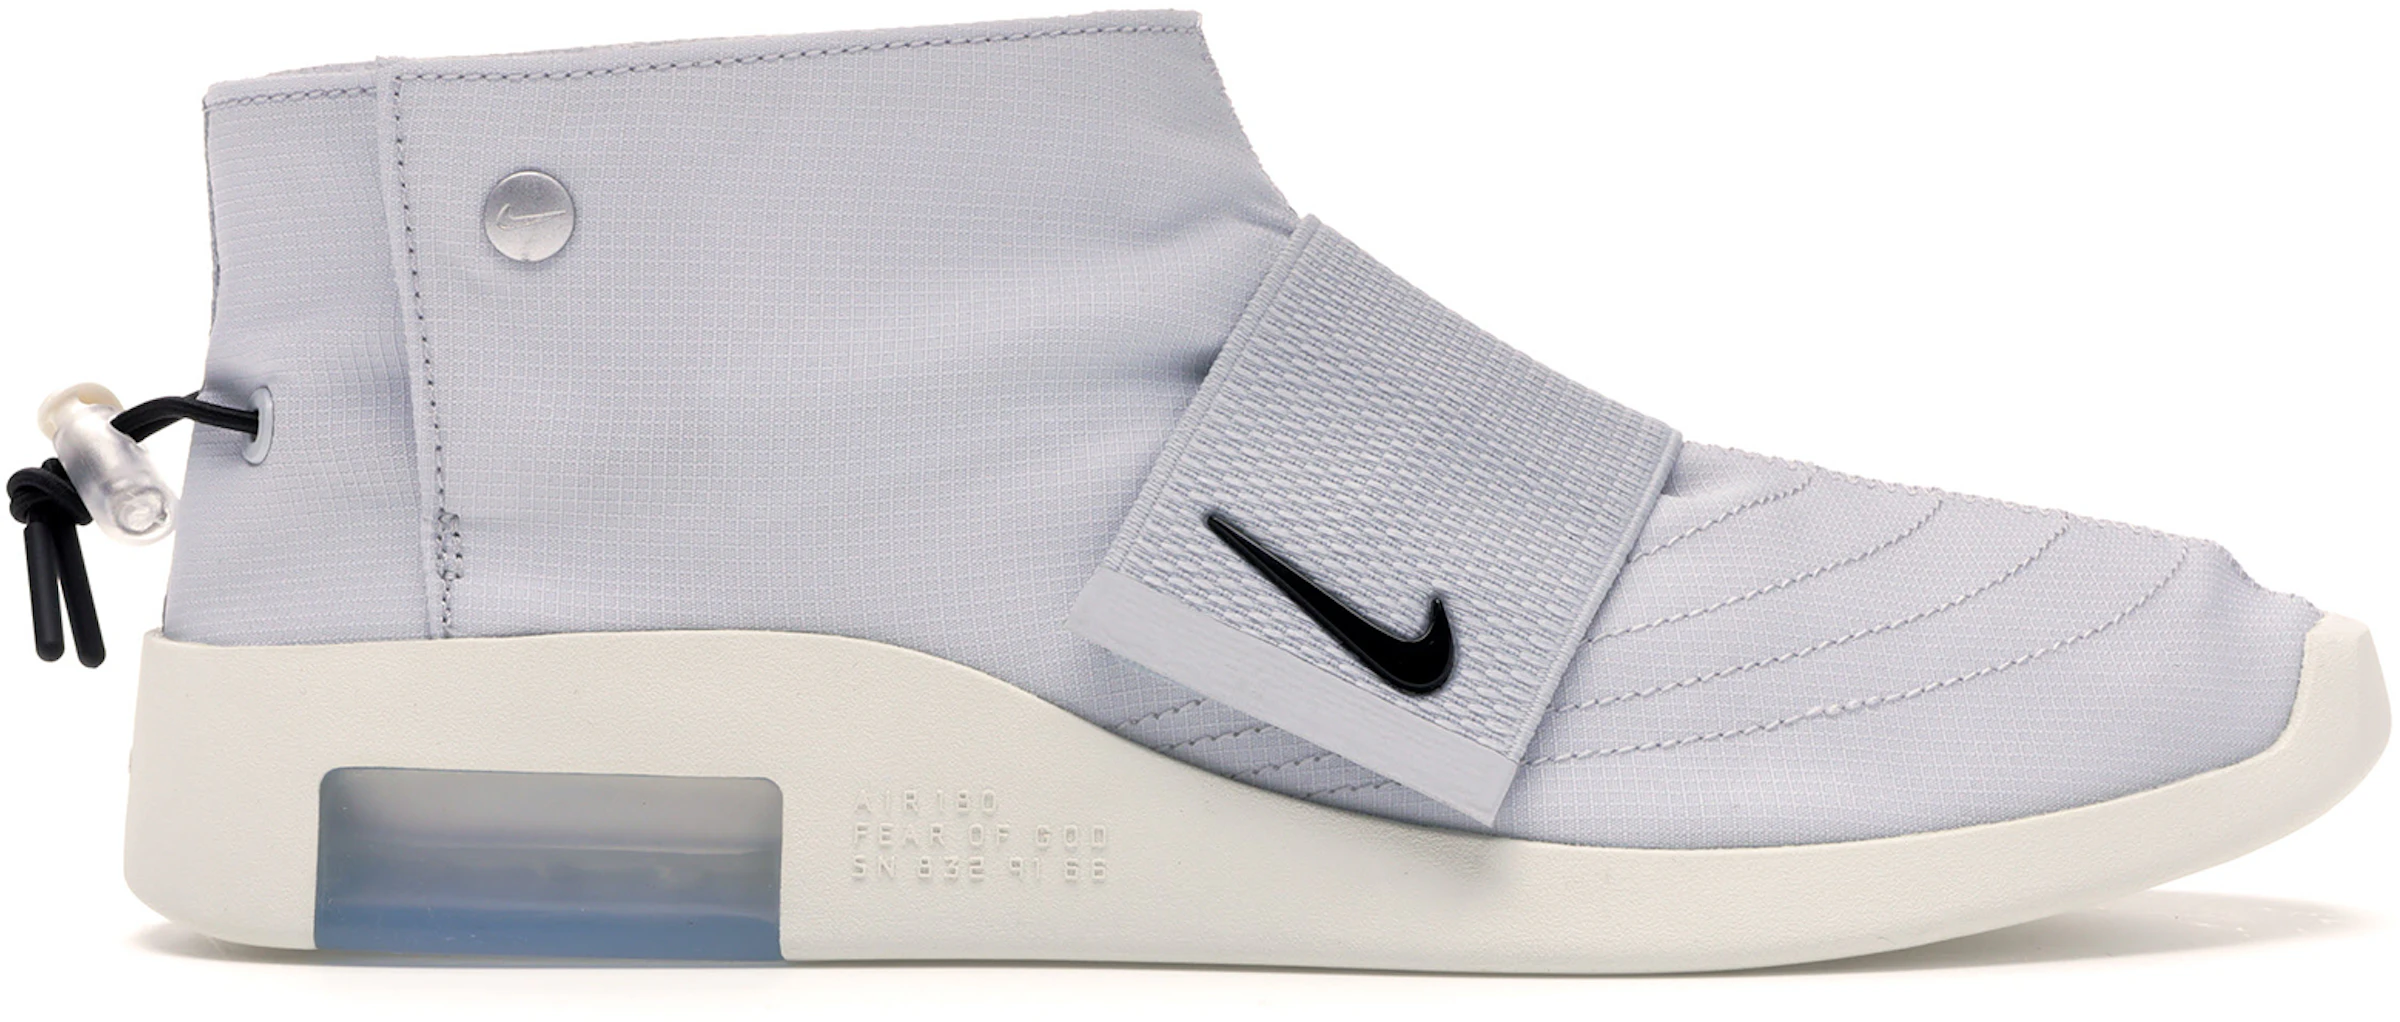 Air Fear Of God Moccasin Pure - AT8086-001 -